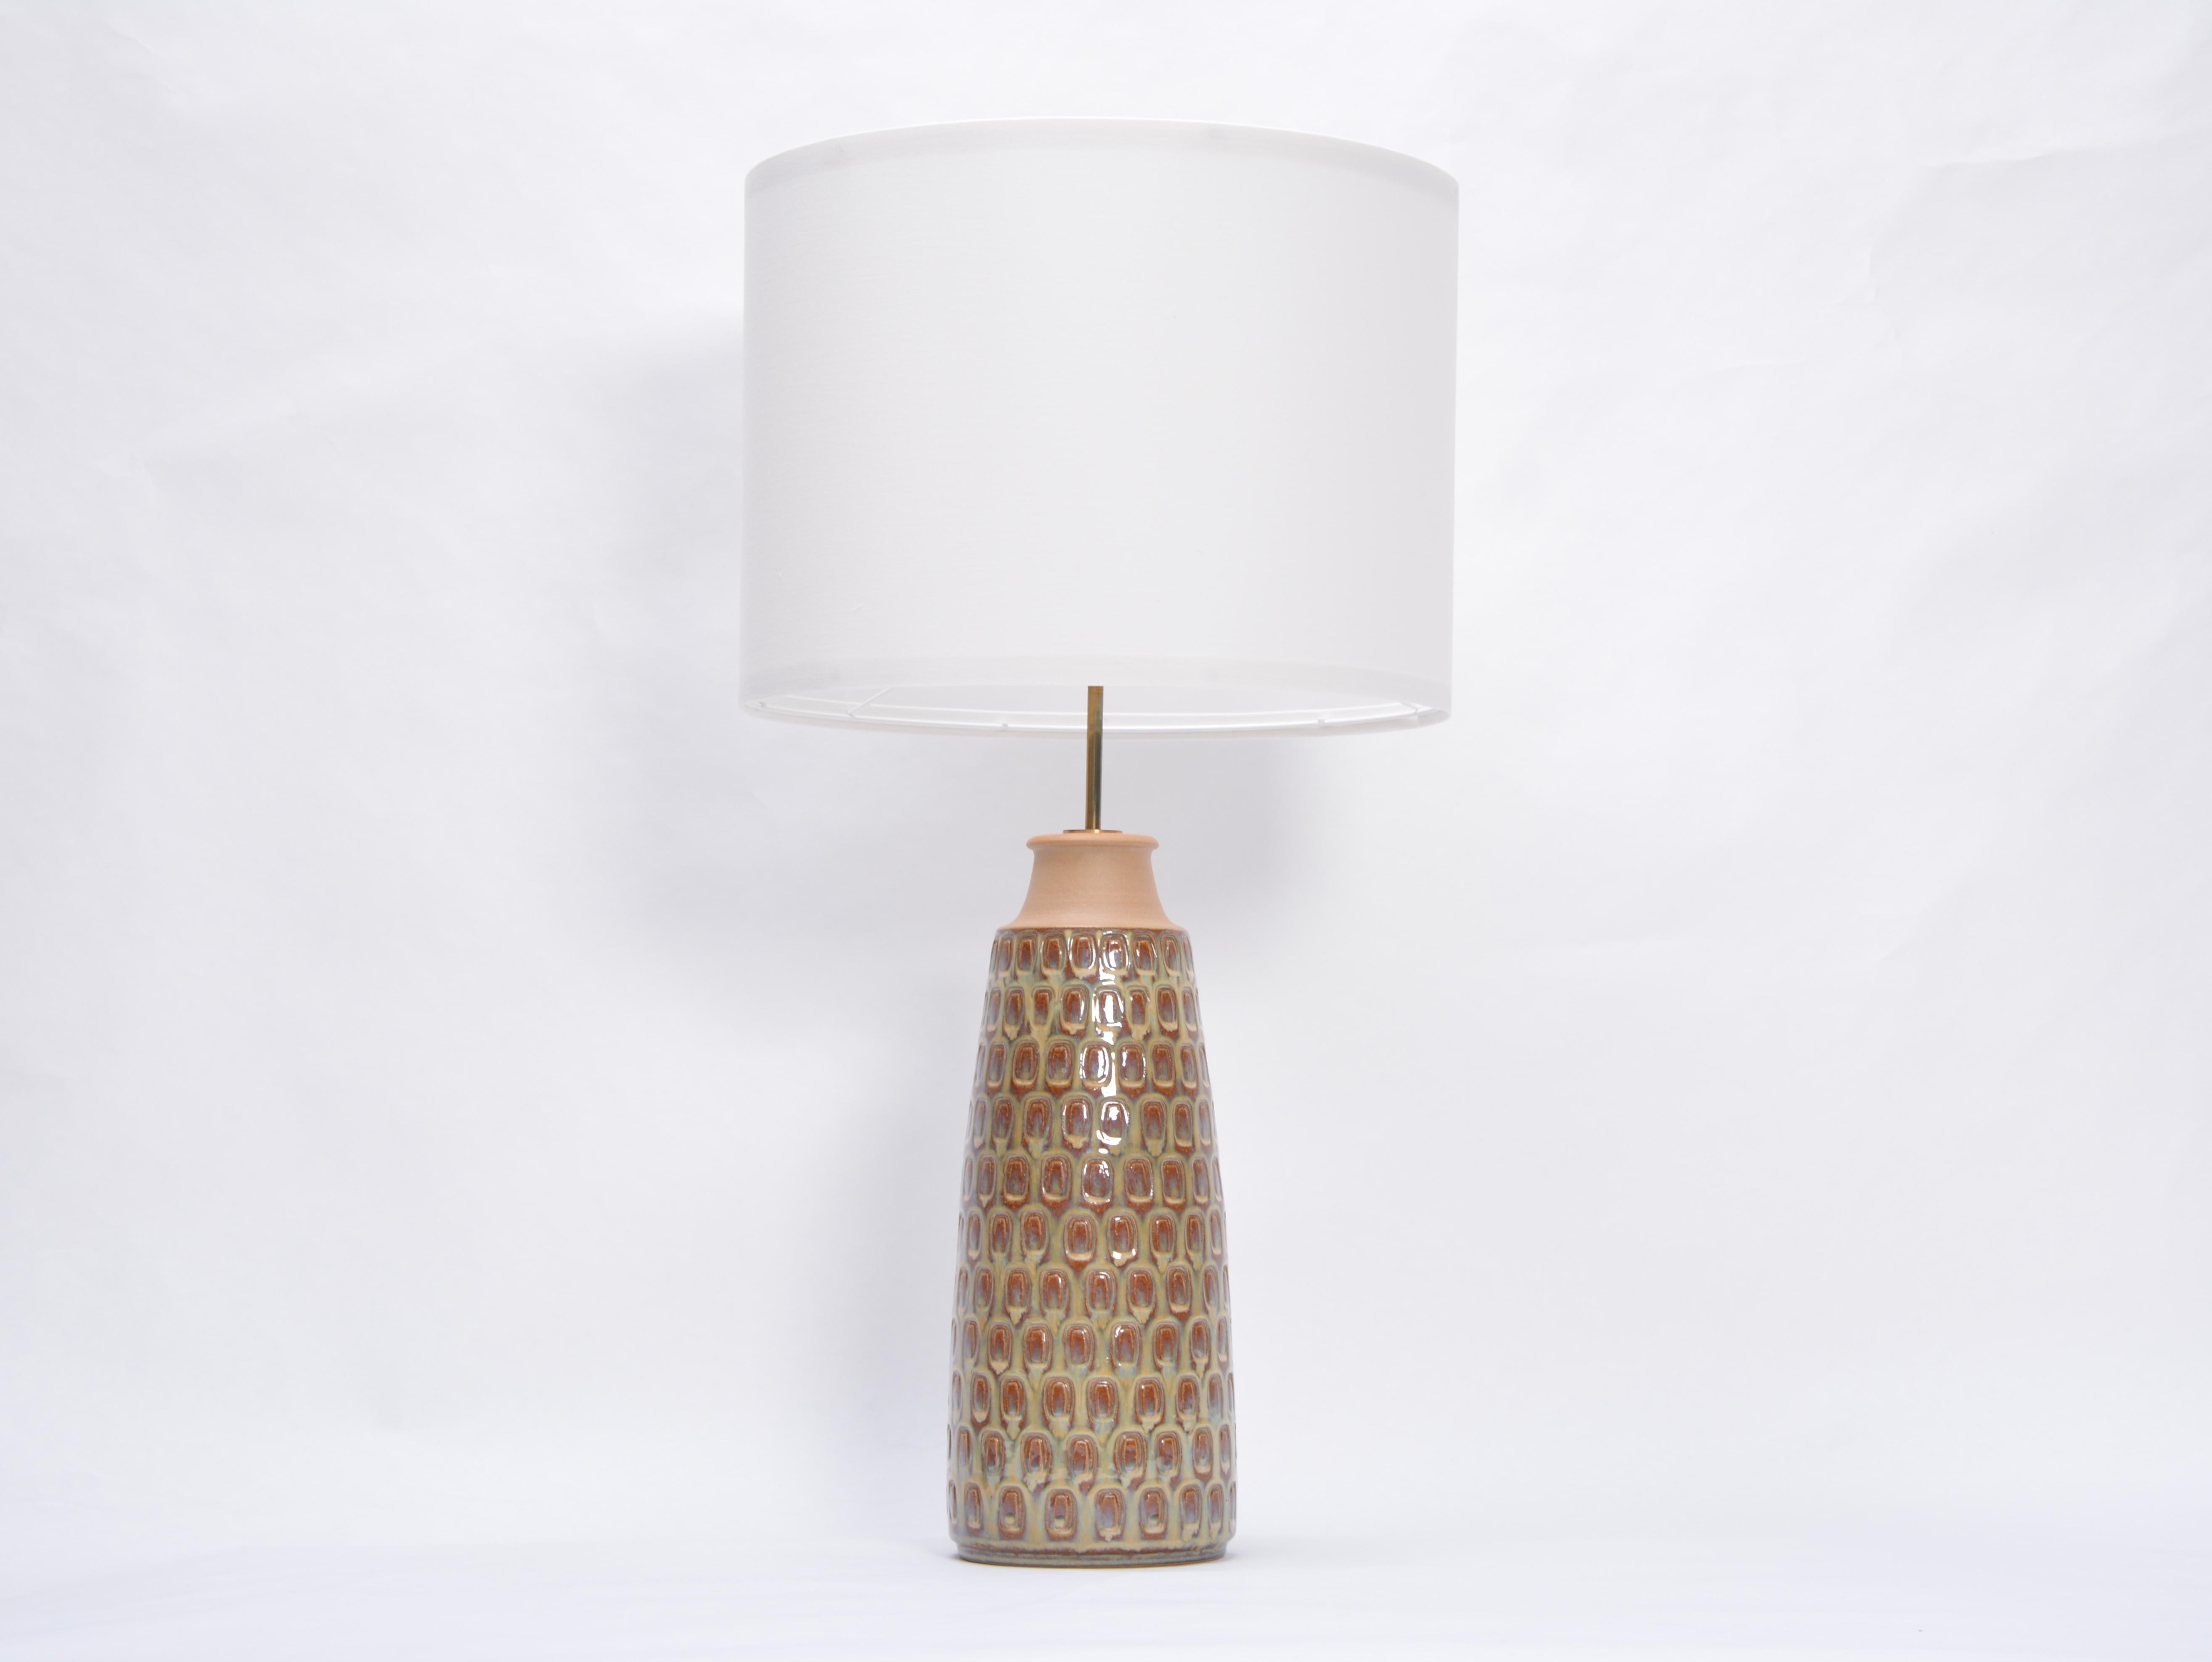 Tall Mid-Century Modern ceramic table lamp model 3017 by Einar Johansen for Soholm
This table lamp was designed by Einar Johansen and produced by Soholm Stentoj in Denmark in the 1960s. Gorgeous glazing in different shades of beige. The base